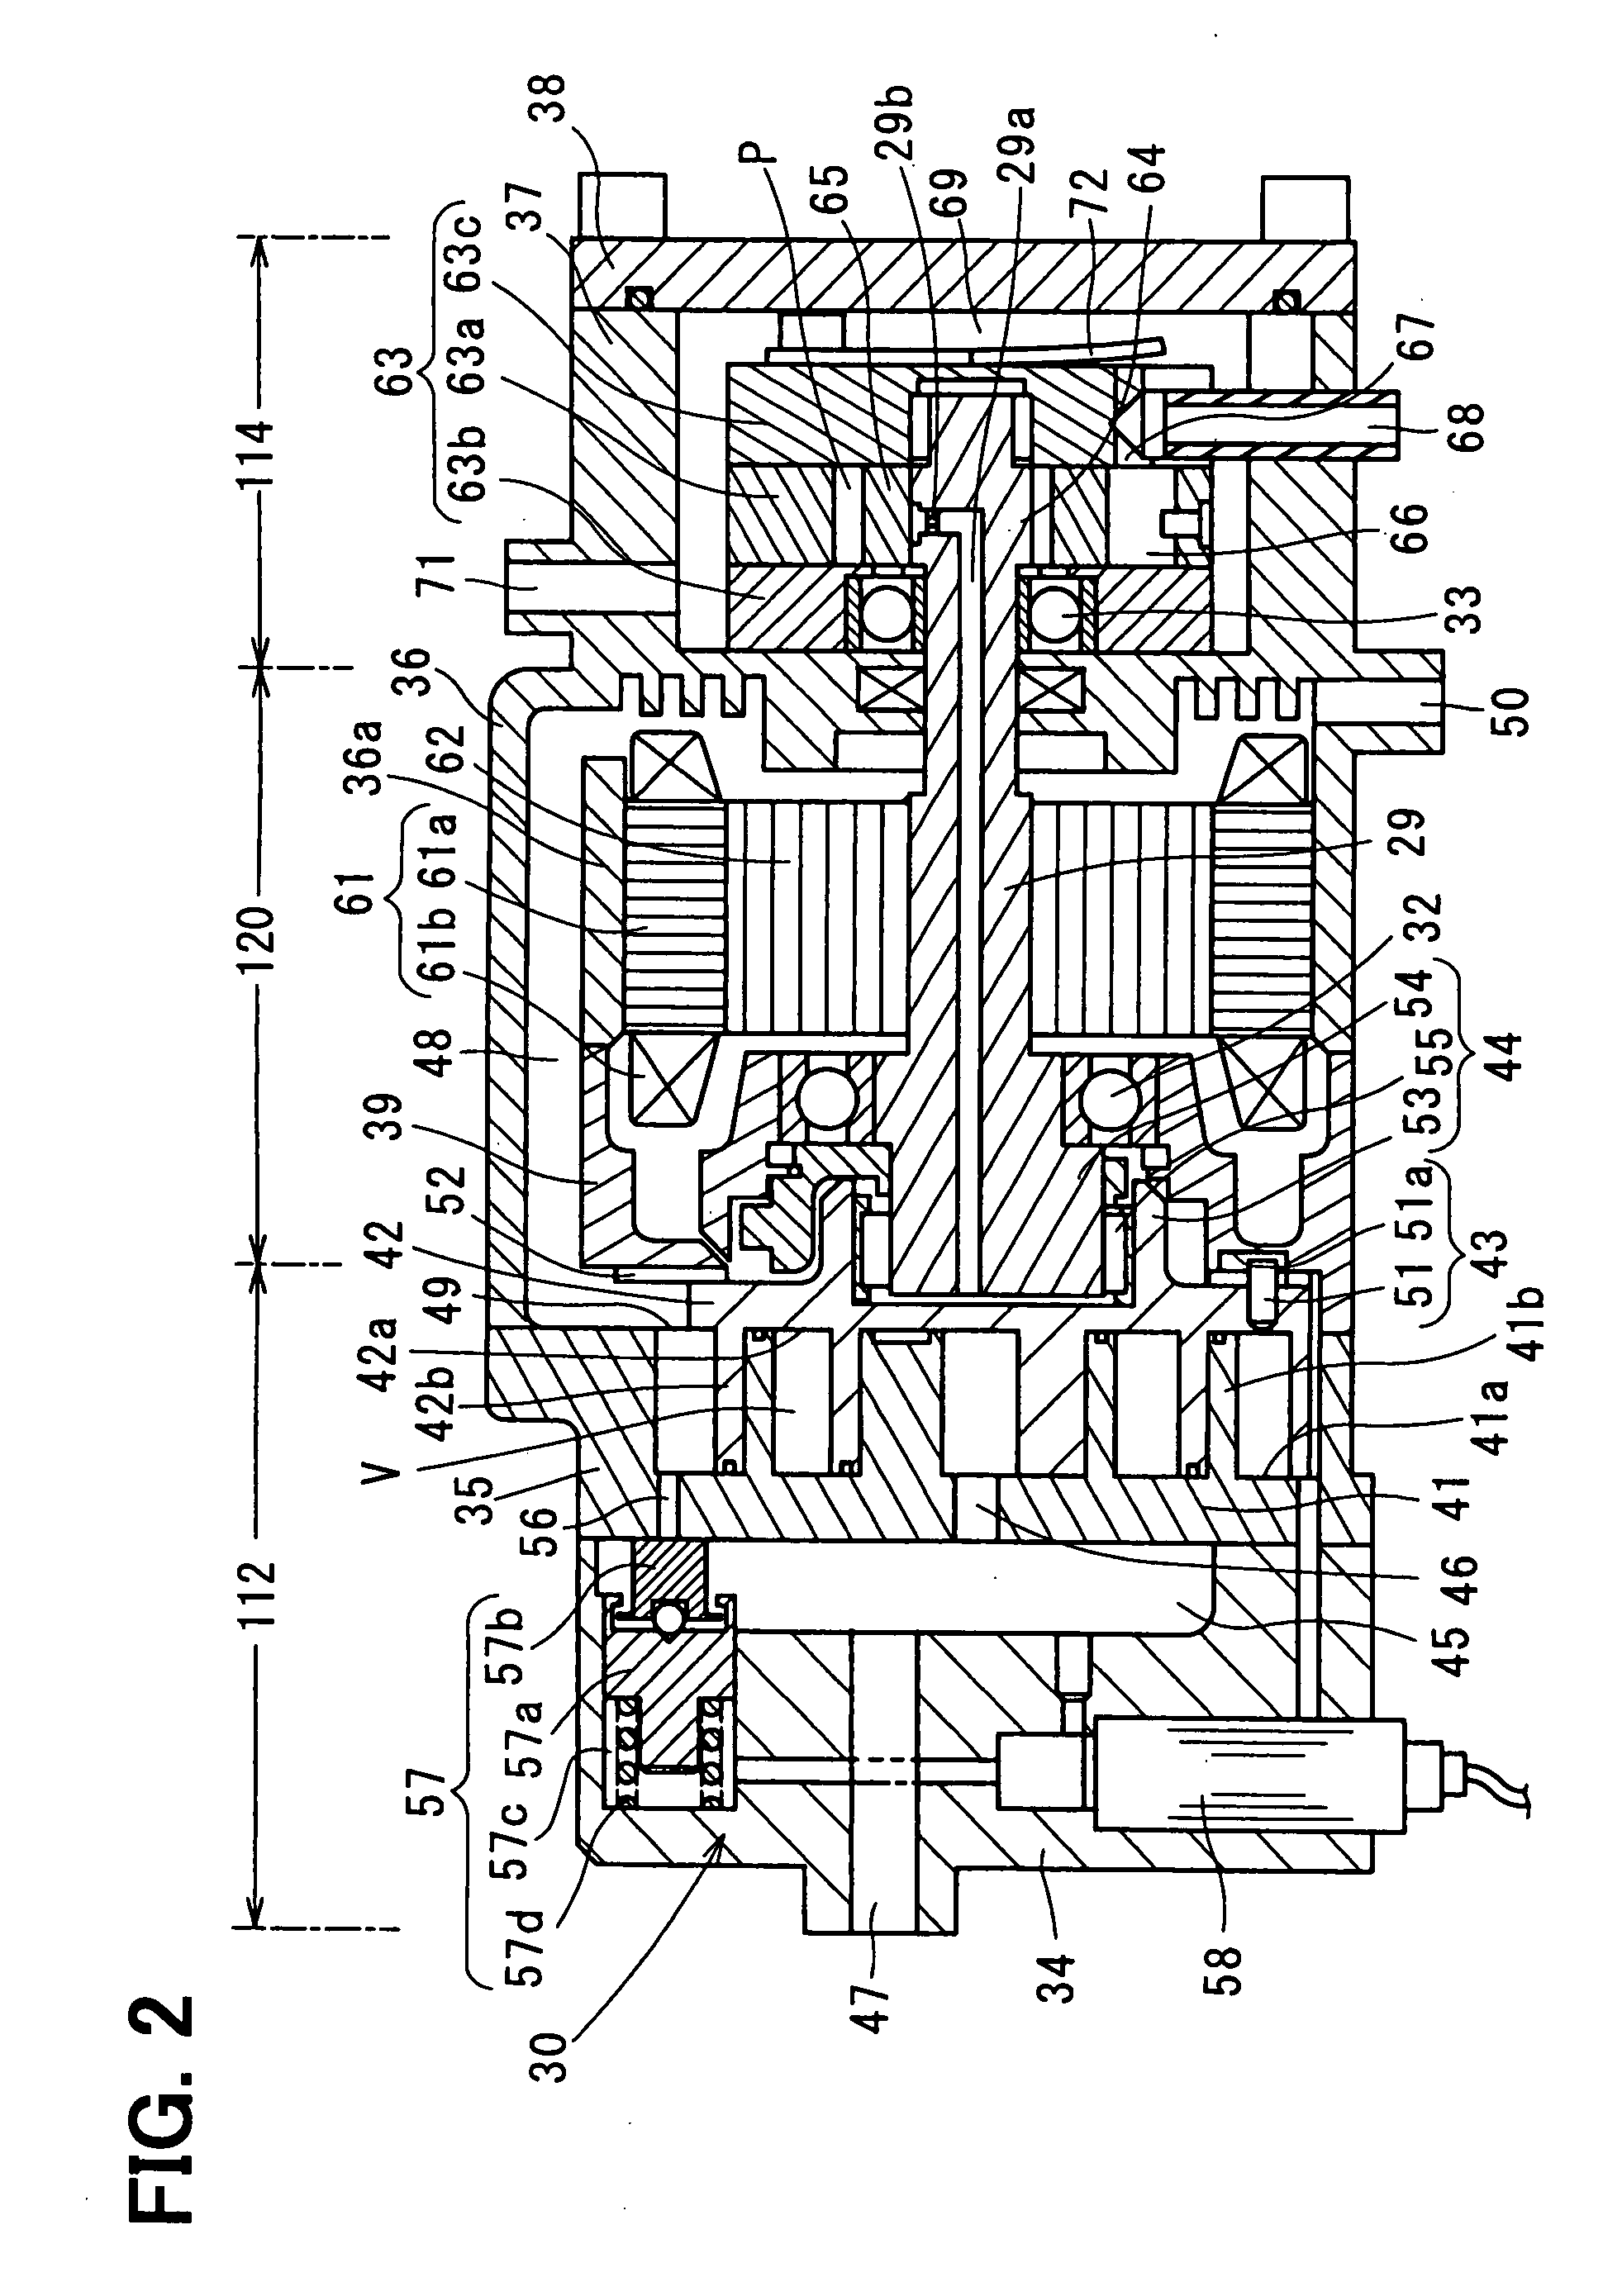 Waste heat collecting system having expansion device